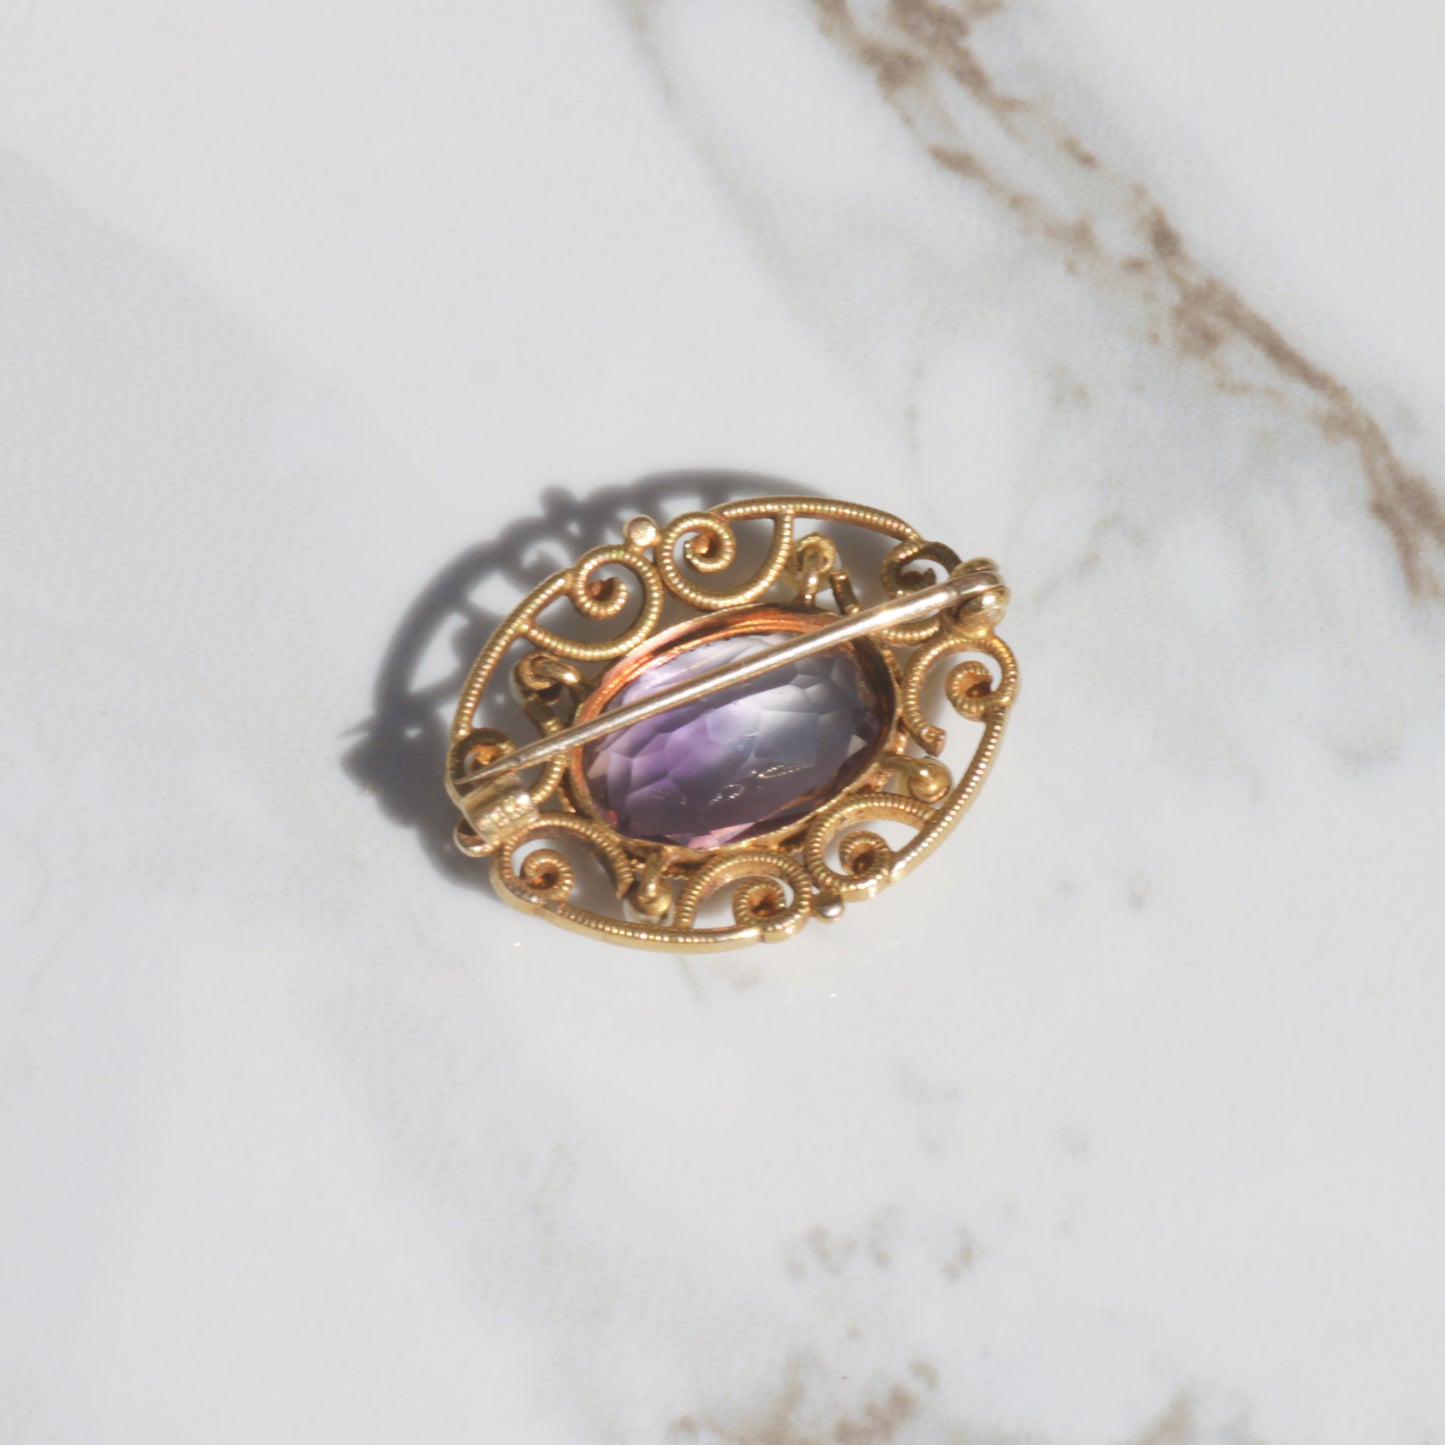 Antique Amethyst and Pearl Brooch 14k Gold